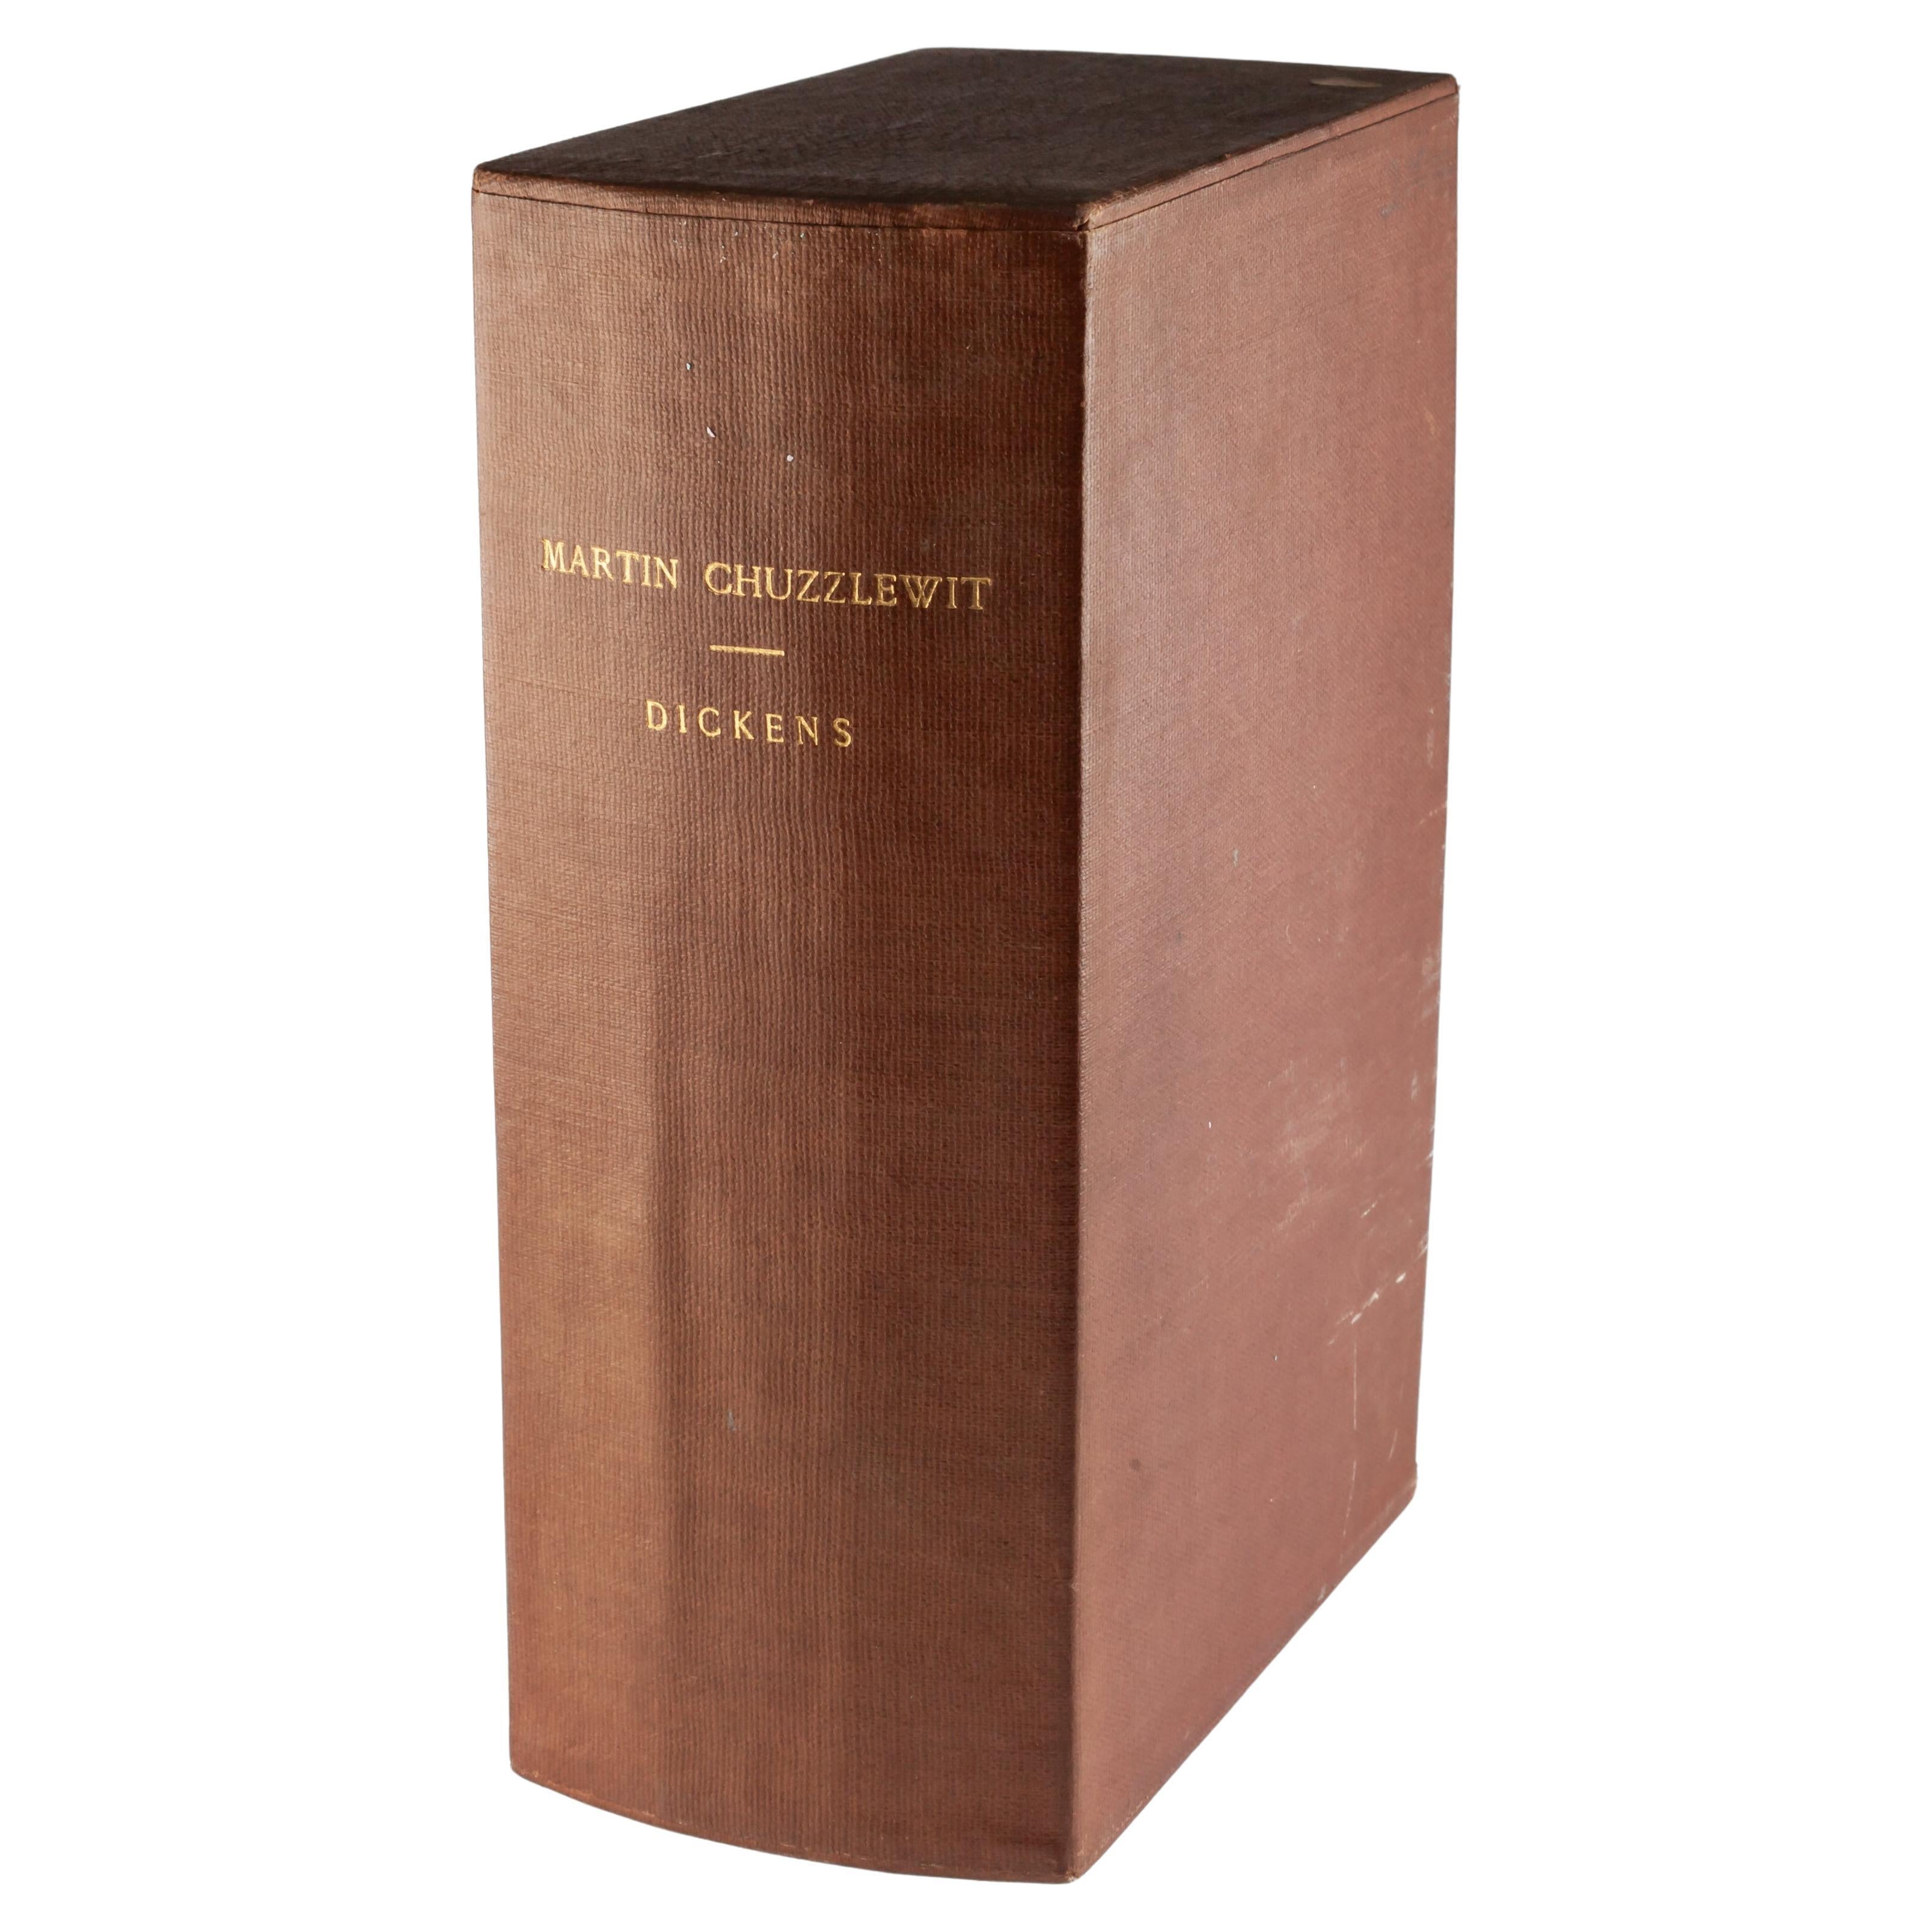 Gorgeous 1st Edition Set of Martin Chuzzlewit by Charles Dickens
Includes 20 Volumes in 19 Issues (Vol. 19 and 20 in final issue)
Includes Hardcase box for storage
All copies included, most in decent antique condition. Some minor foxxing and